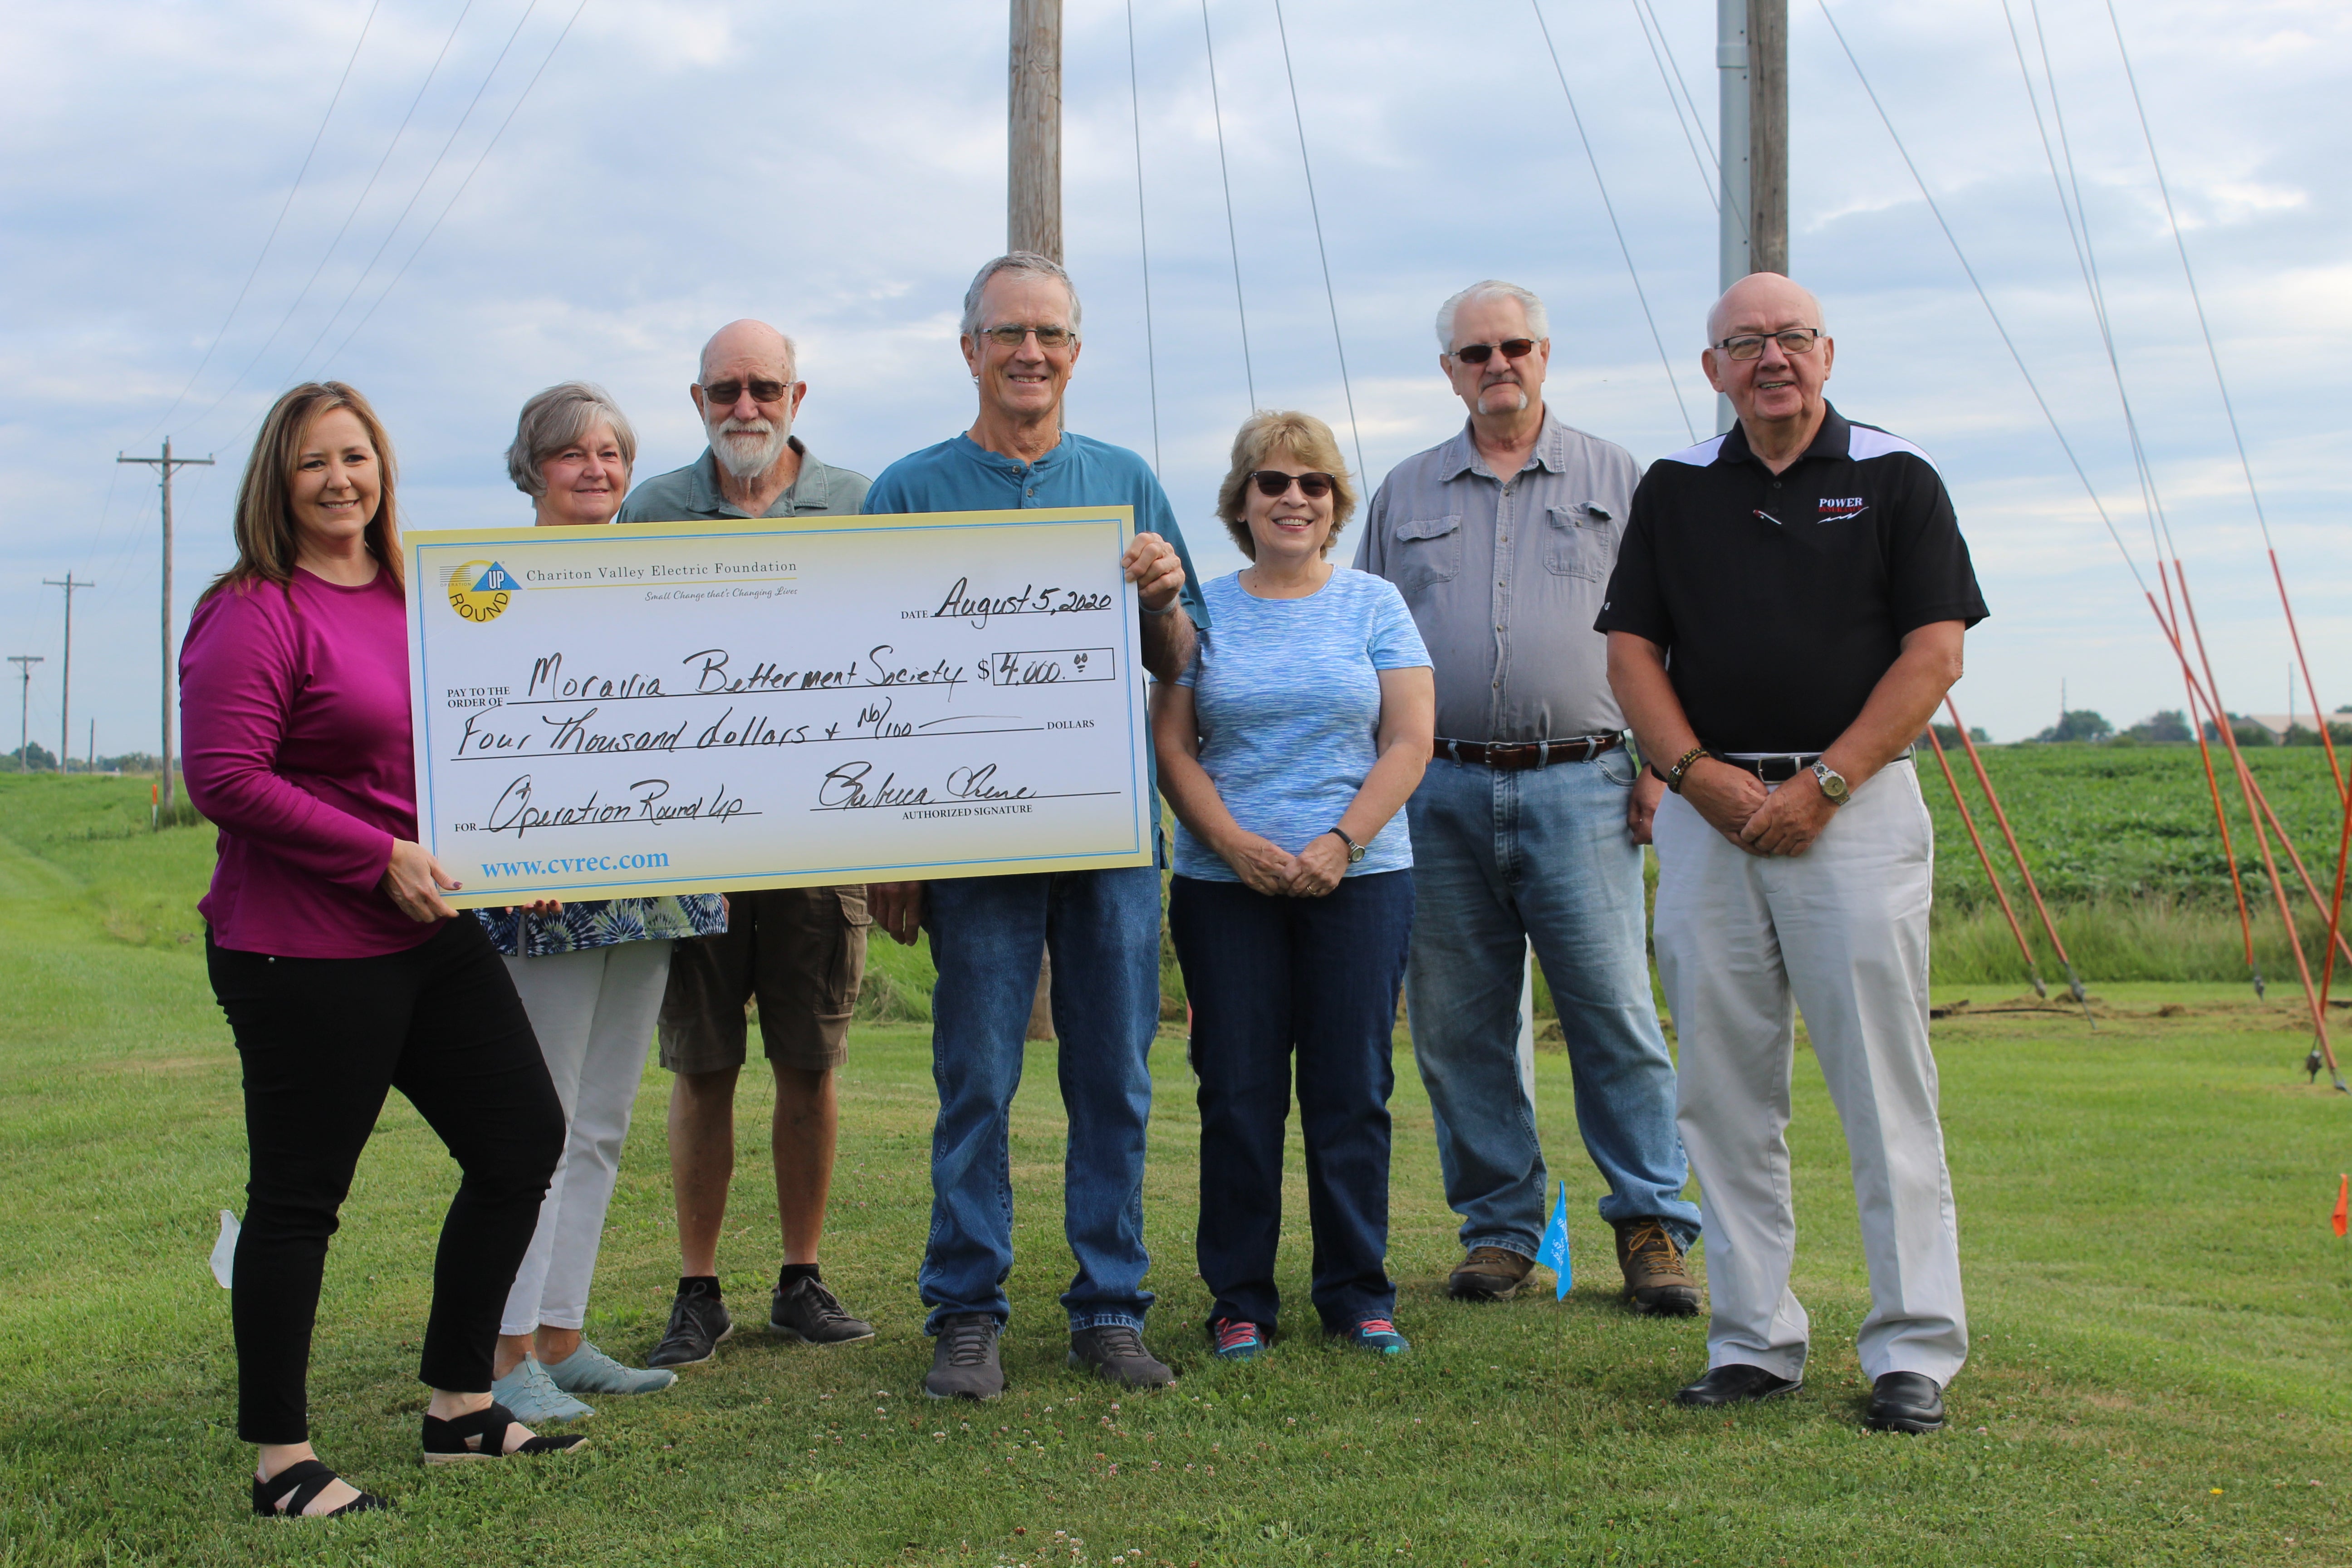 Moravia Betterment Funds awarded